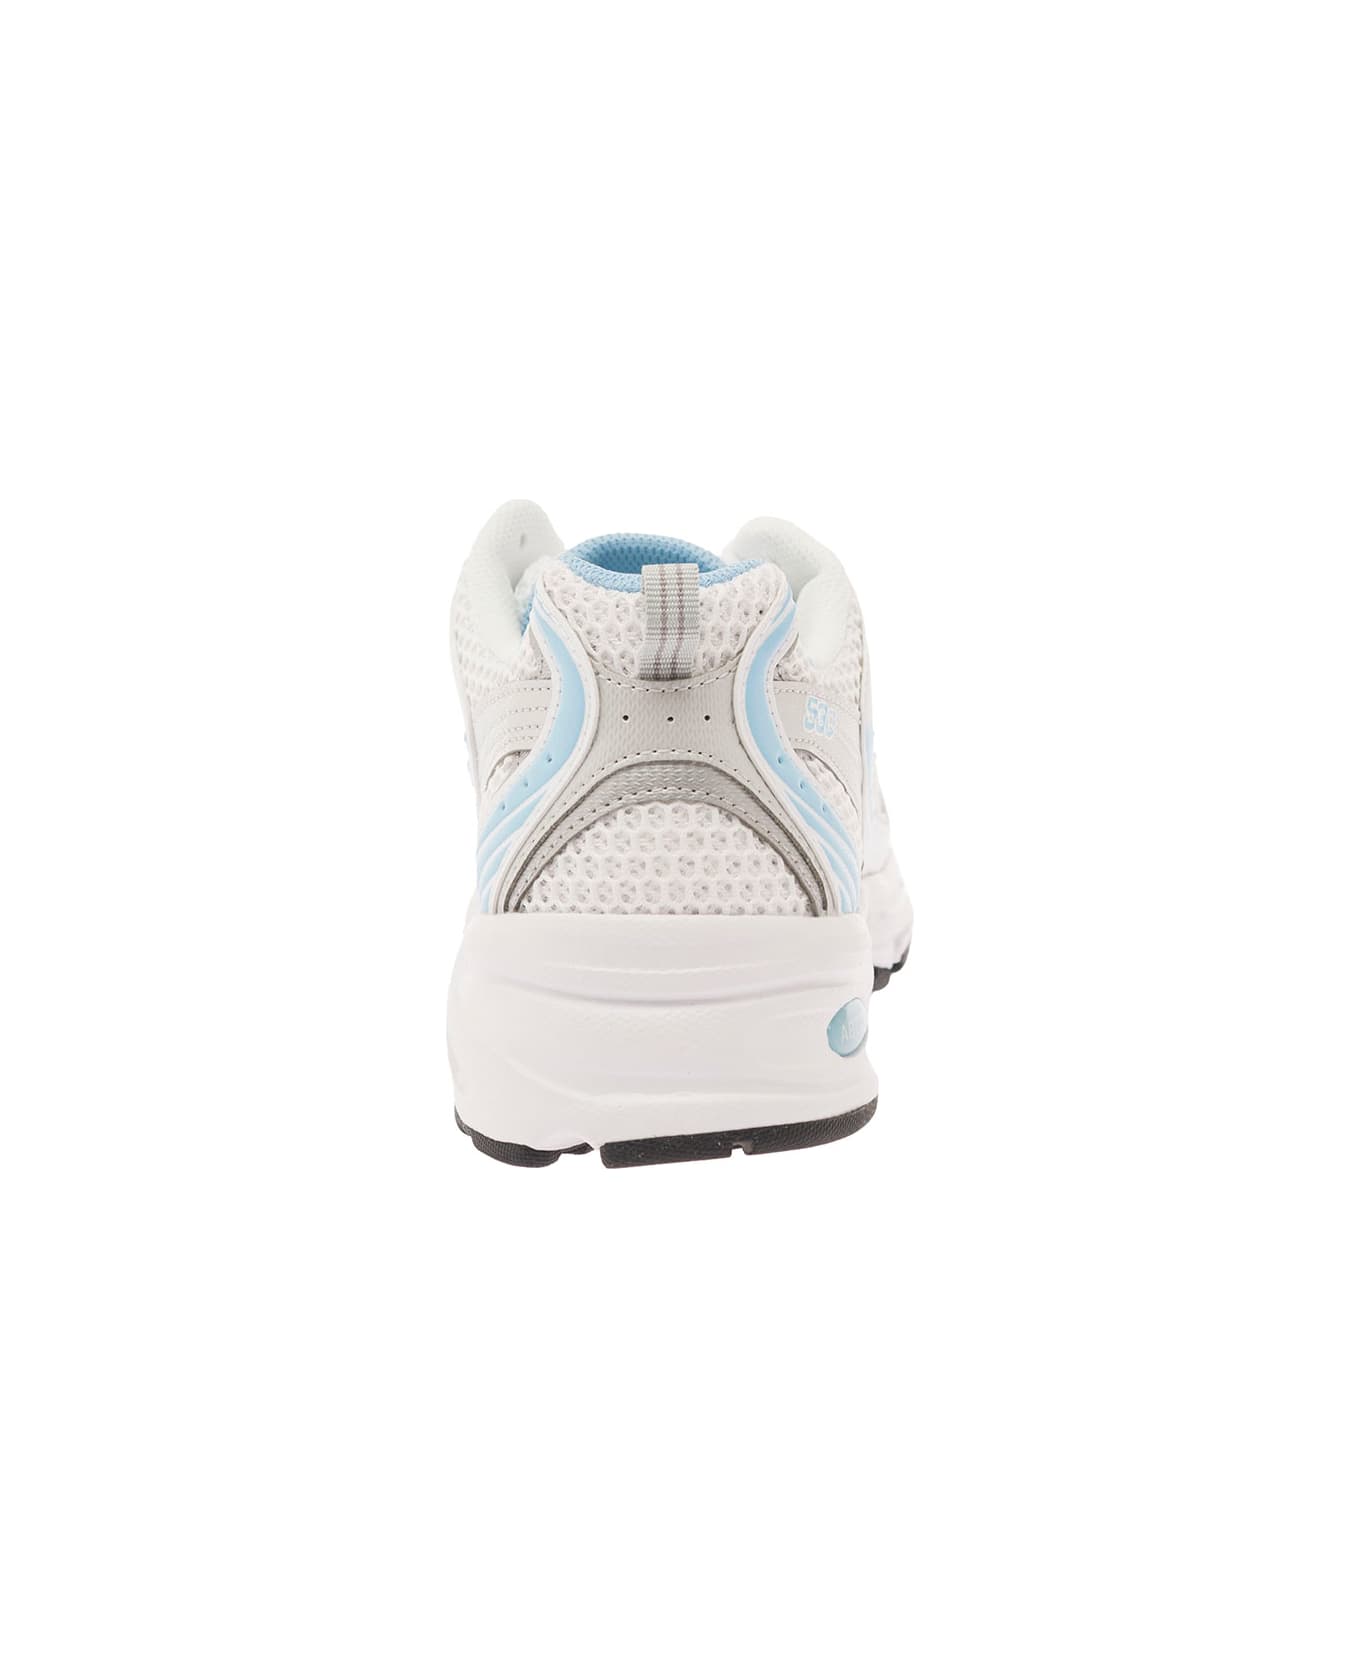 New Balance '530' White And Light Blue Low Top Sneakers With Logo Patch In Tech Fabric Man - White